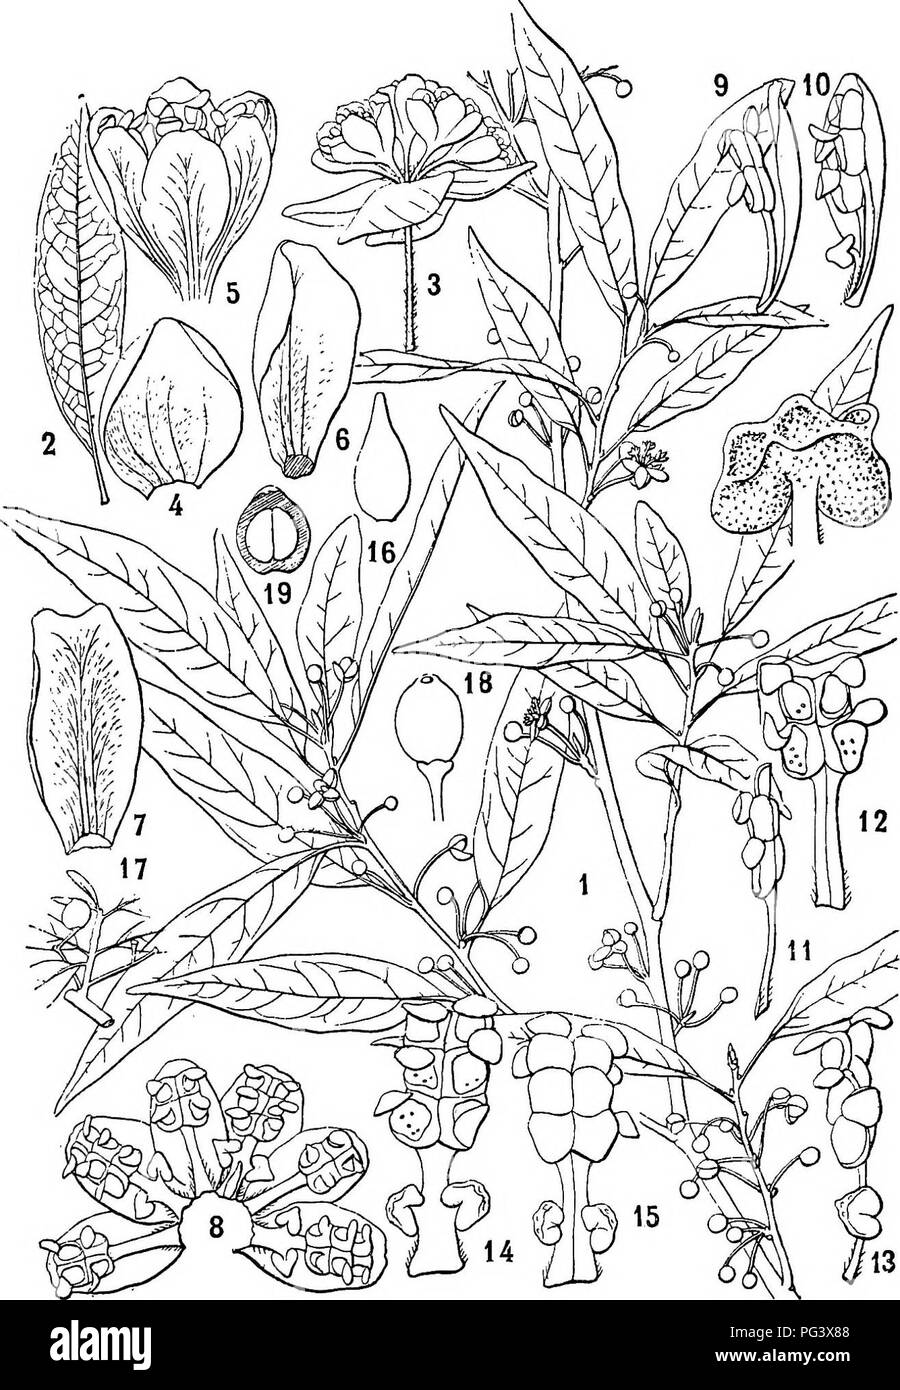 . Icones plantarum formosanarum nec non et contributiones ad floram formosanam; or, Icones of the plants of Formosa, and materials for a flora of the island, based on a study of the collections of the Botanical survey of the Government of Formosa. Botany. LATJBINEiE. 163. Fig. 21. Actinoiaphns cUrata (Blumb.) 1, u. branch; 2, « leaf; 3, a flower-umbel; 4, a bract; 5, ft flower- 6, 7, calyx-lobes; 8, limb o£ the calyx, expanded; 9, 10, etamena of one kind seen from different sides ; 11, 12, stamens of another kind; 13, 14, 15, stamens of another kind; 16. a rudinientary ovary: 17, a branch with Stock Photo